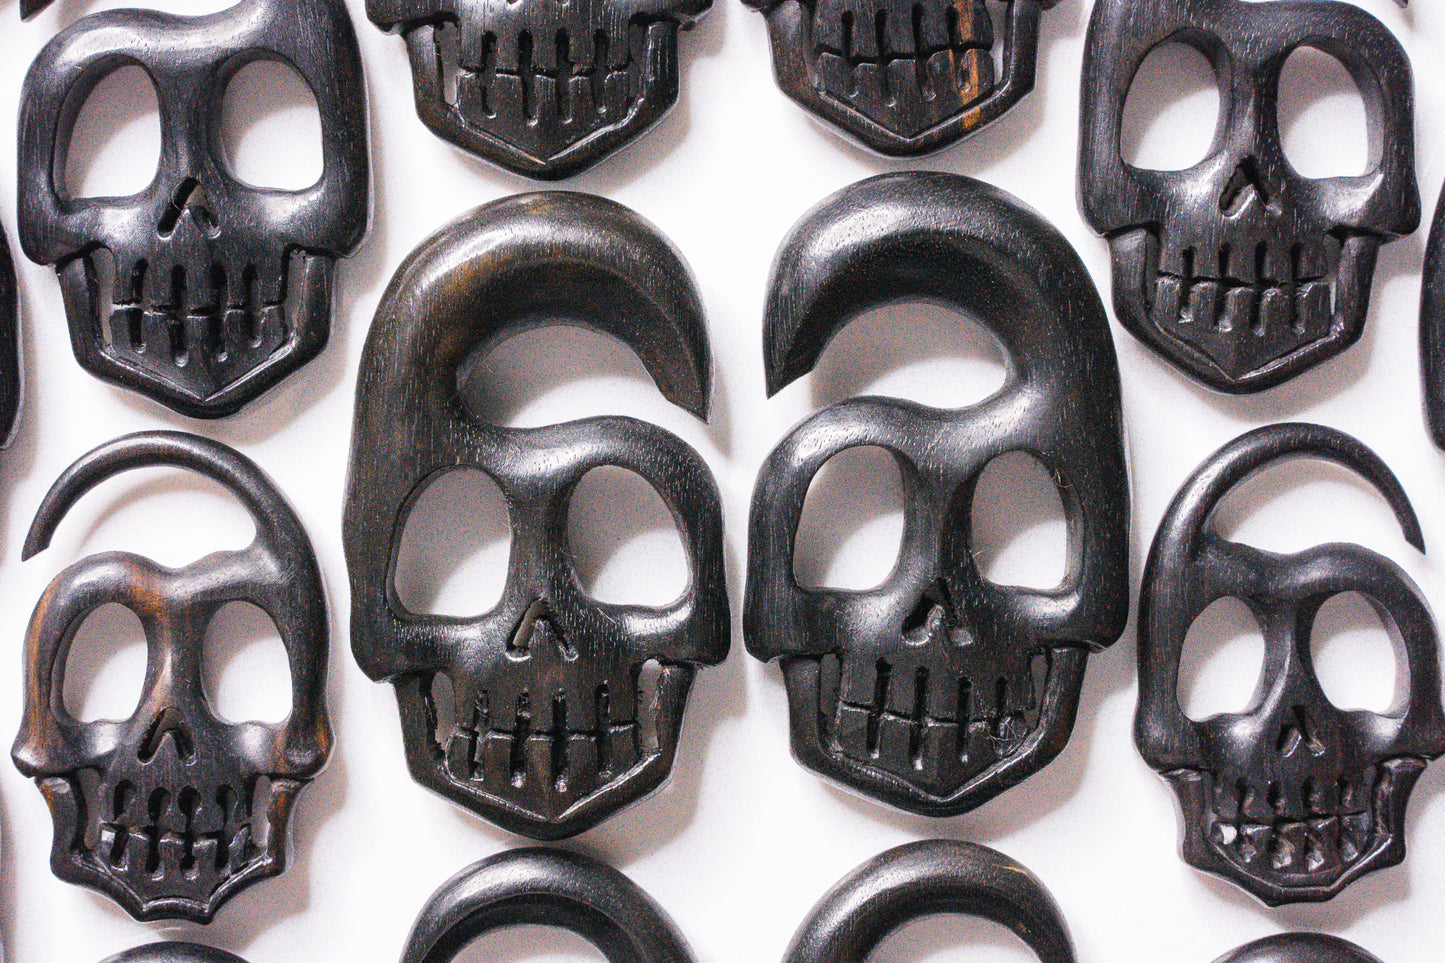 stretched ear skull wood plugs